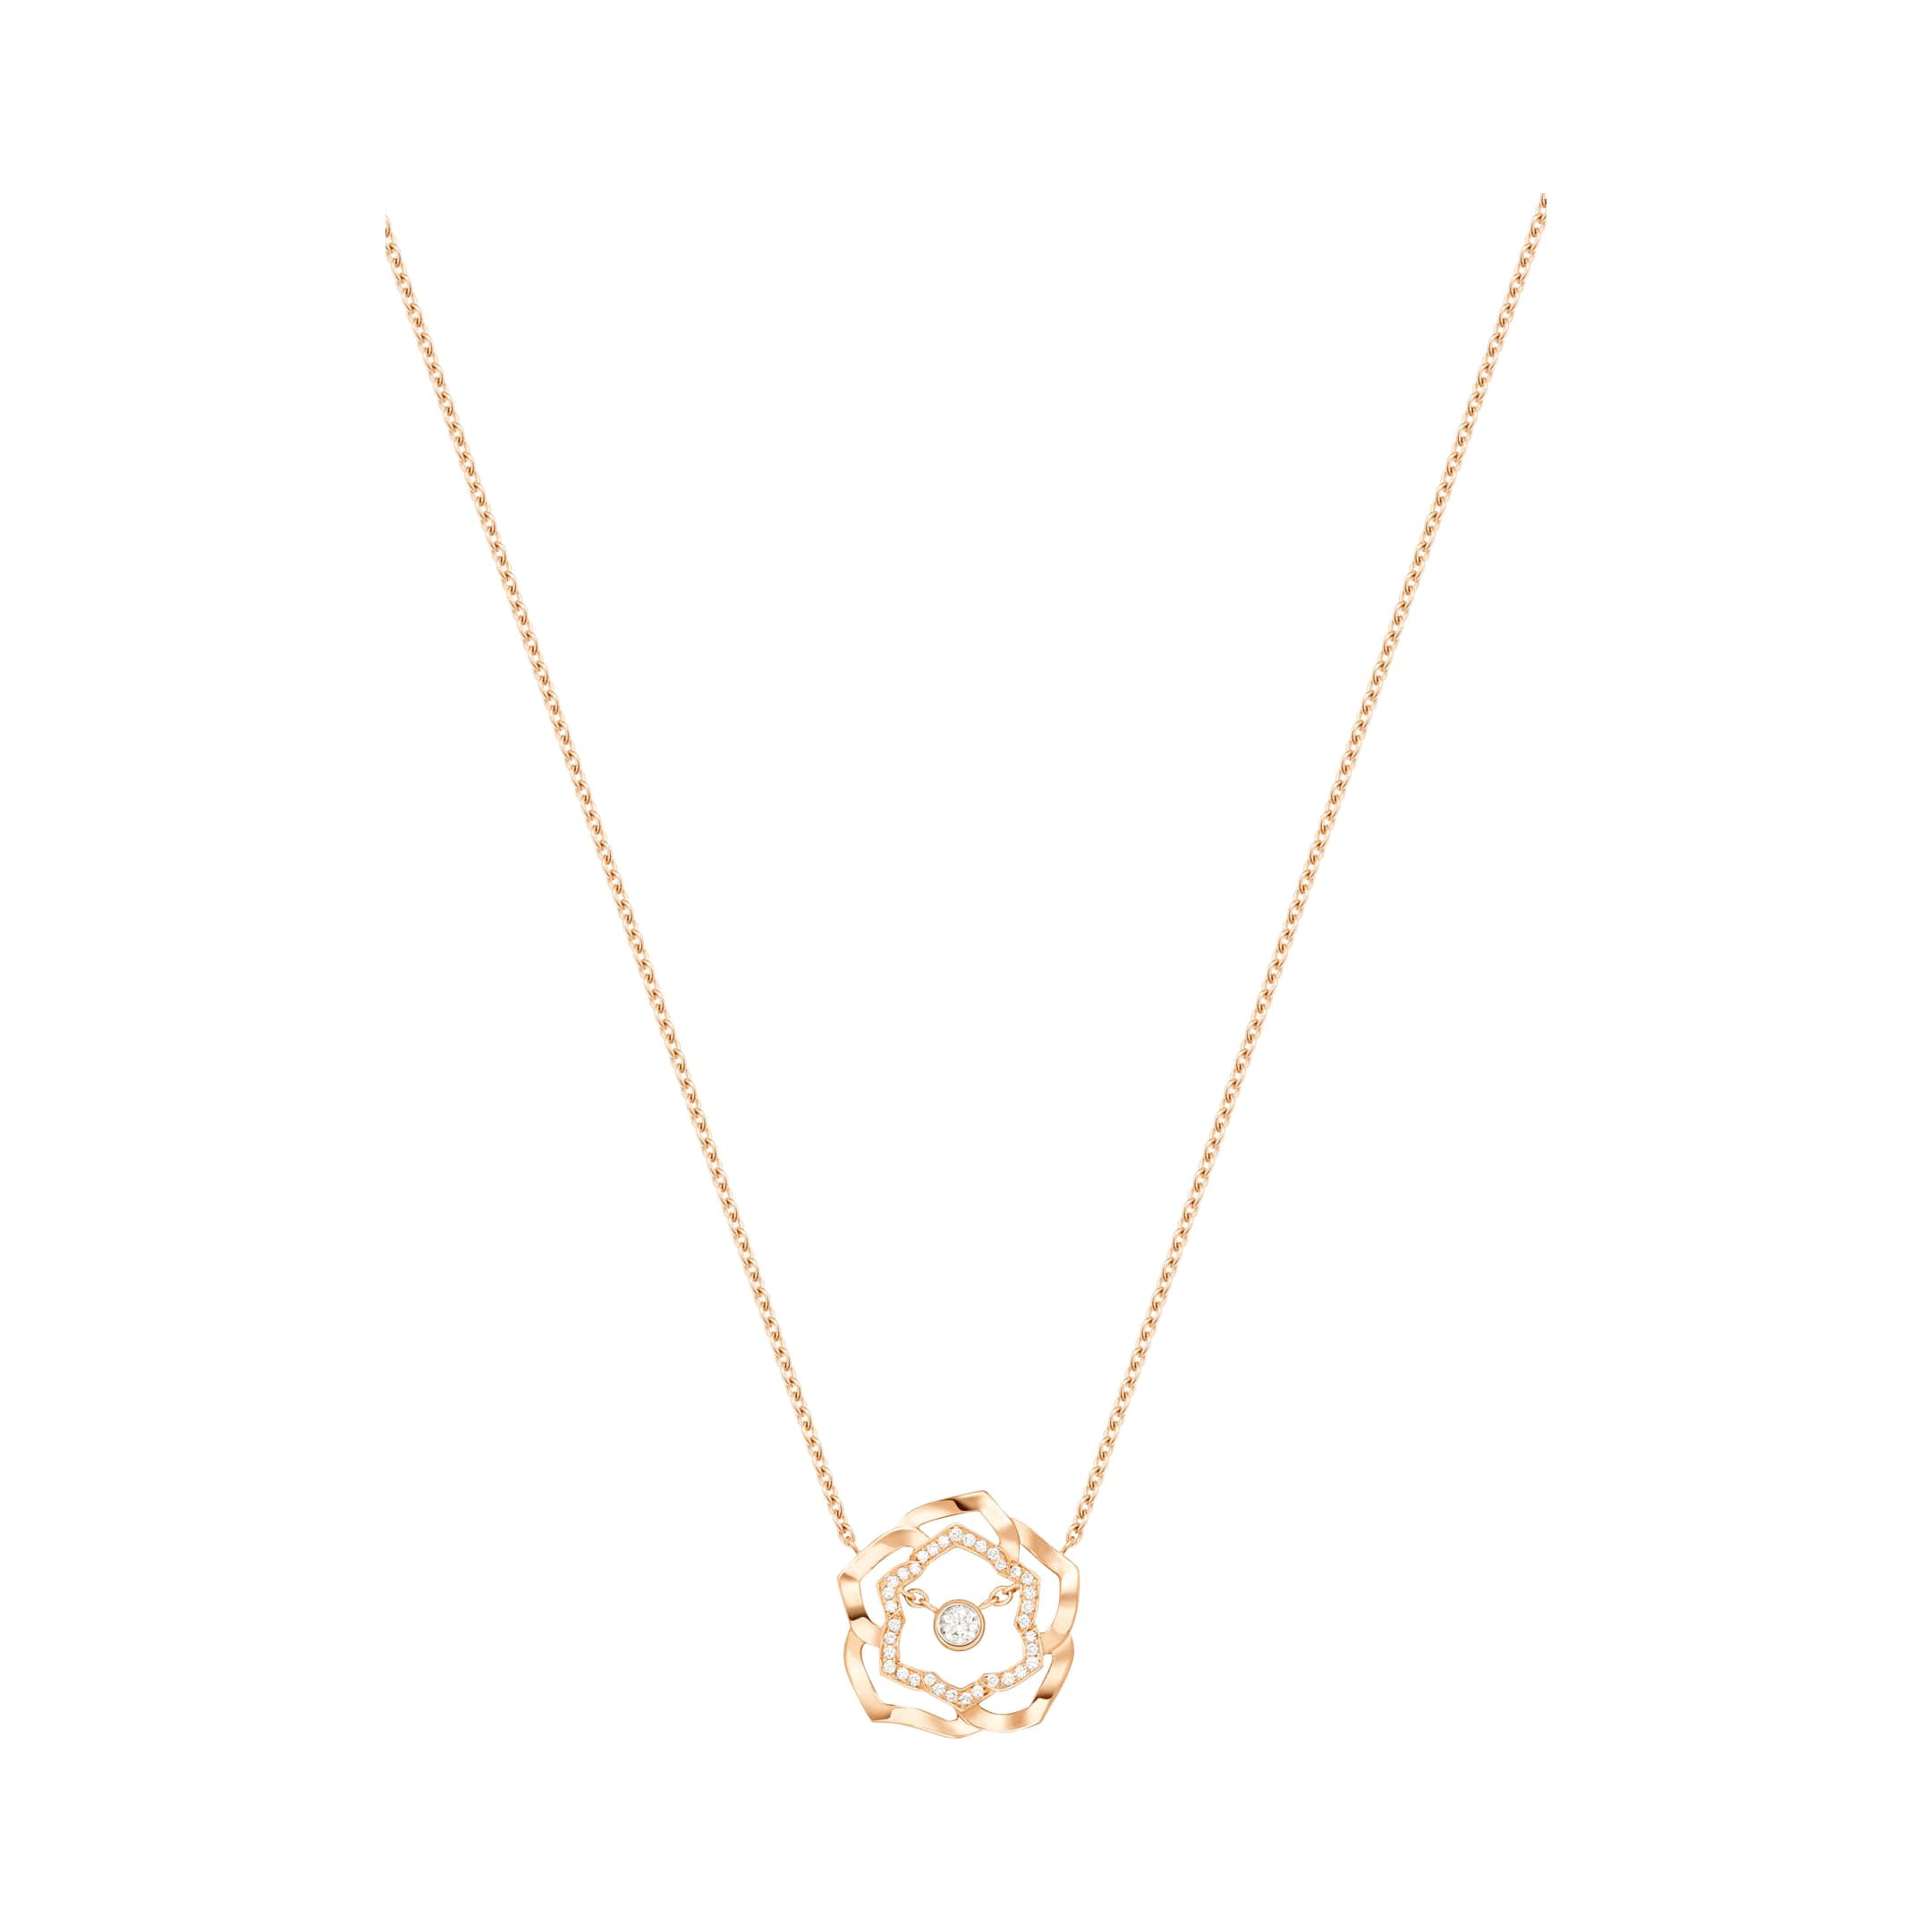 Wholesale OEM/ODM Jewelry OEM Rose pendant in 18K rose gold set custom made with your design